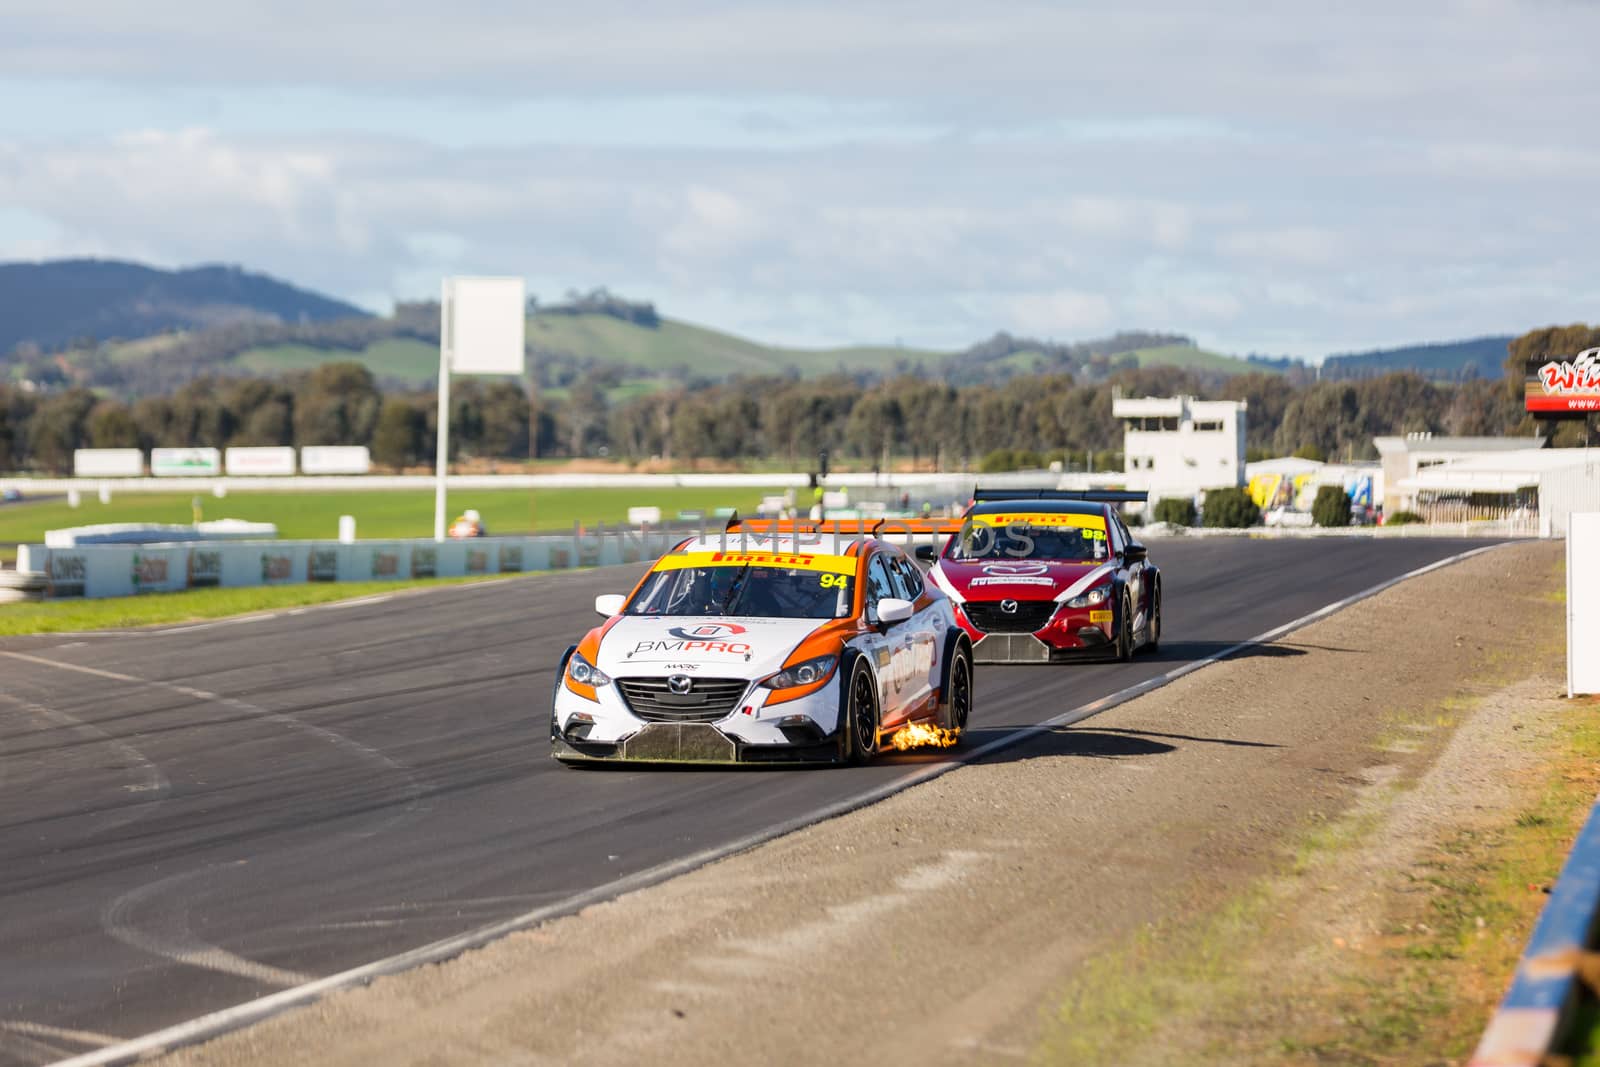 MELBOURNE, WINTON/AUSTRALIA, 12 JUNE , 2016: Australian GT Trophy driver, Morgan Haber in race 1 of the Shannnon's Nationals on the 12 June, 2016 at Winton.